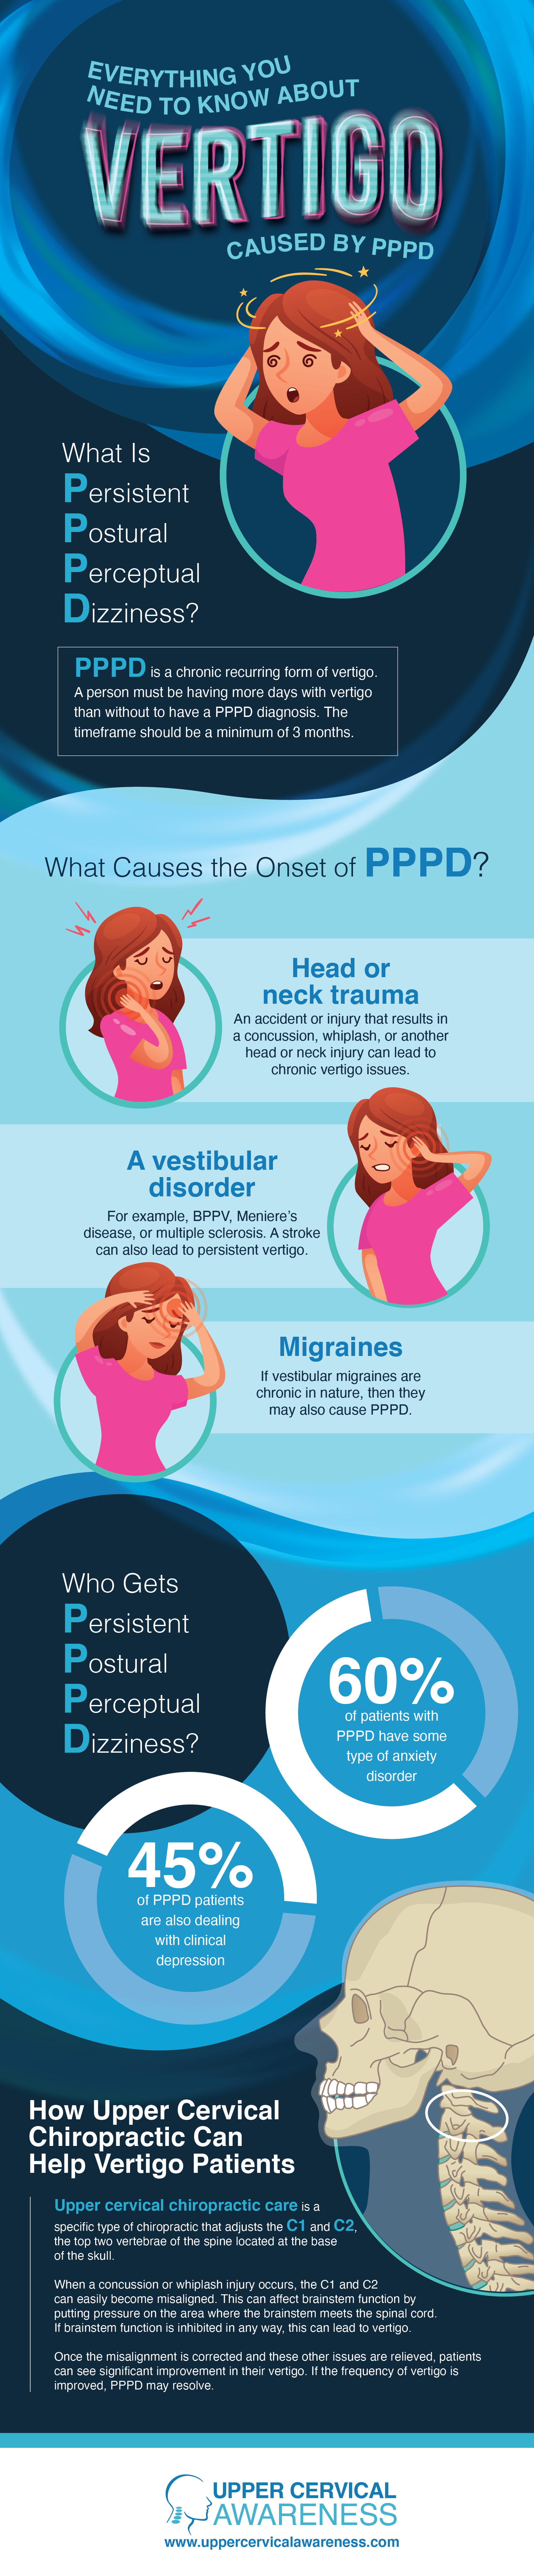 Everything You Need to Know About Vertigo Caused by PPPD.